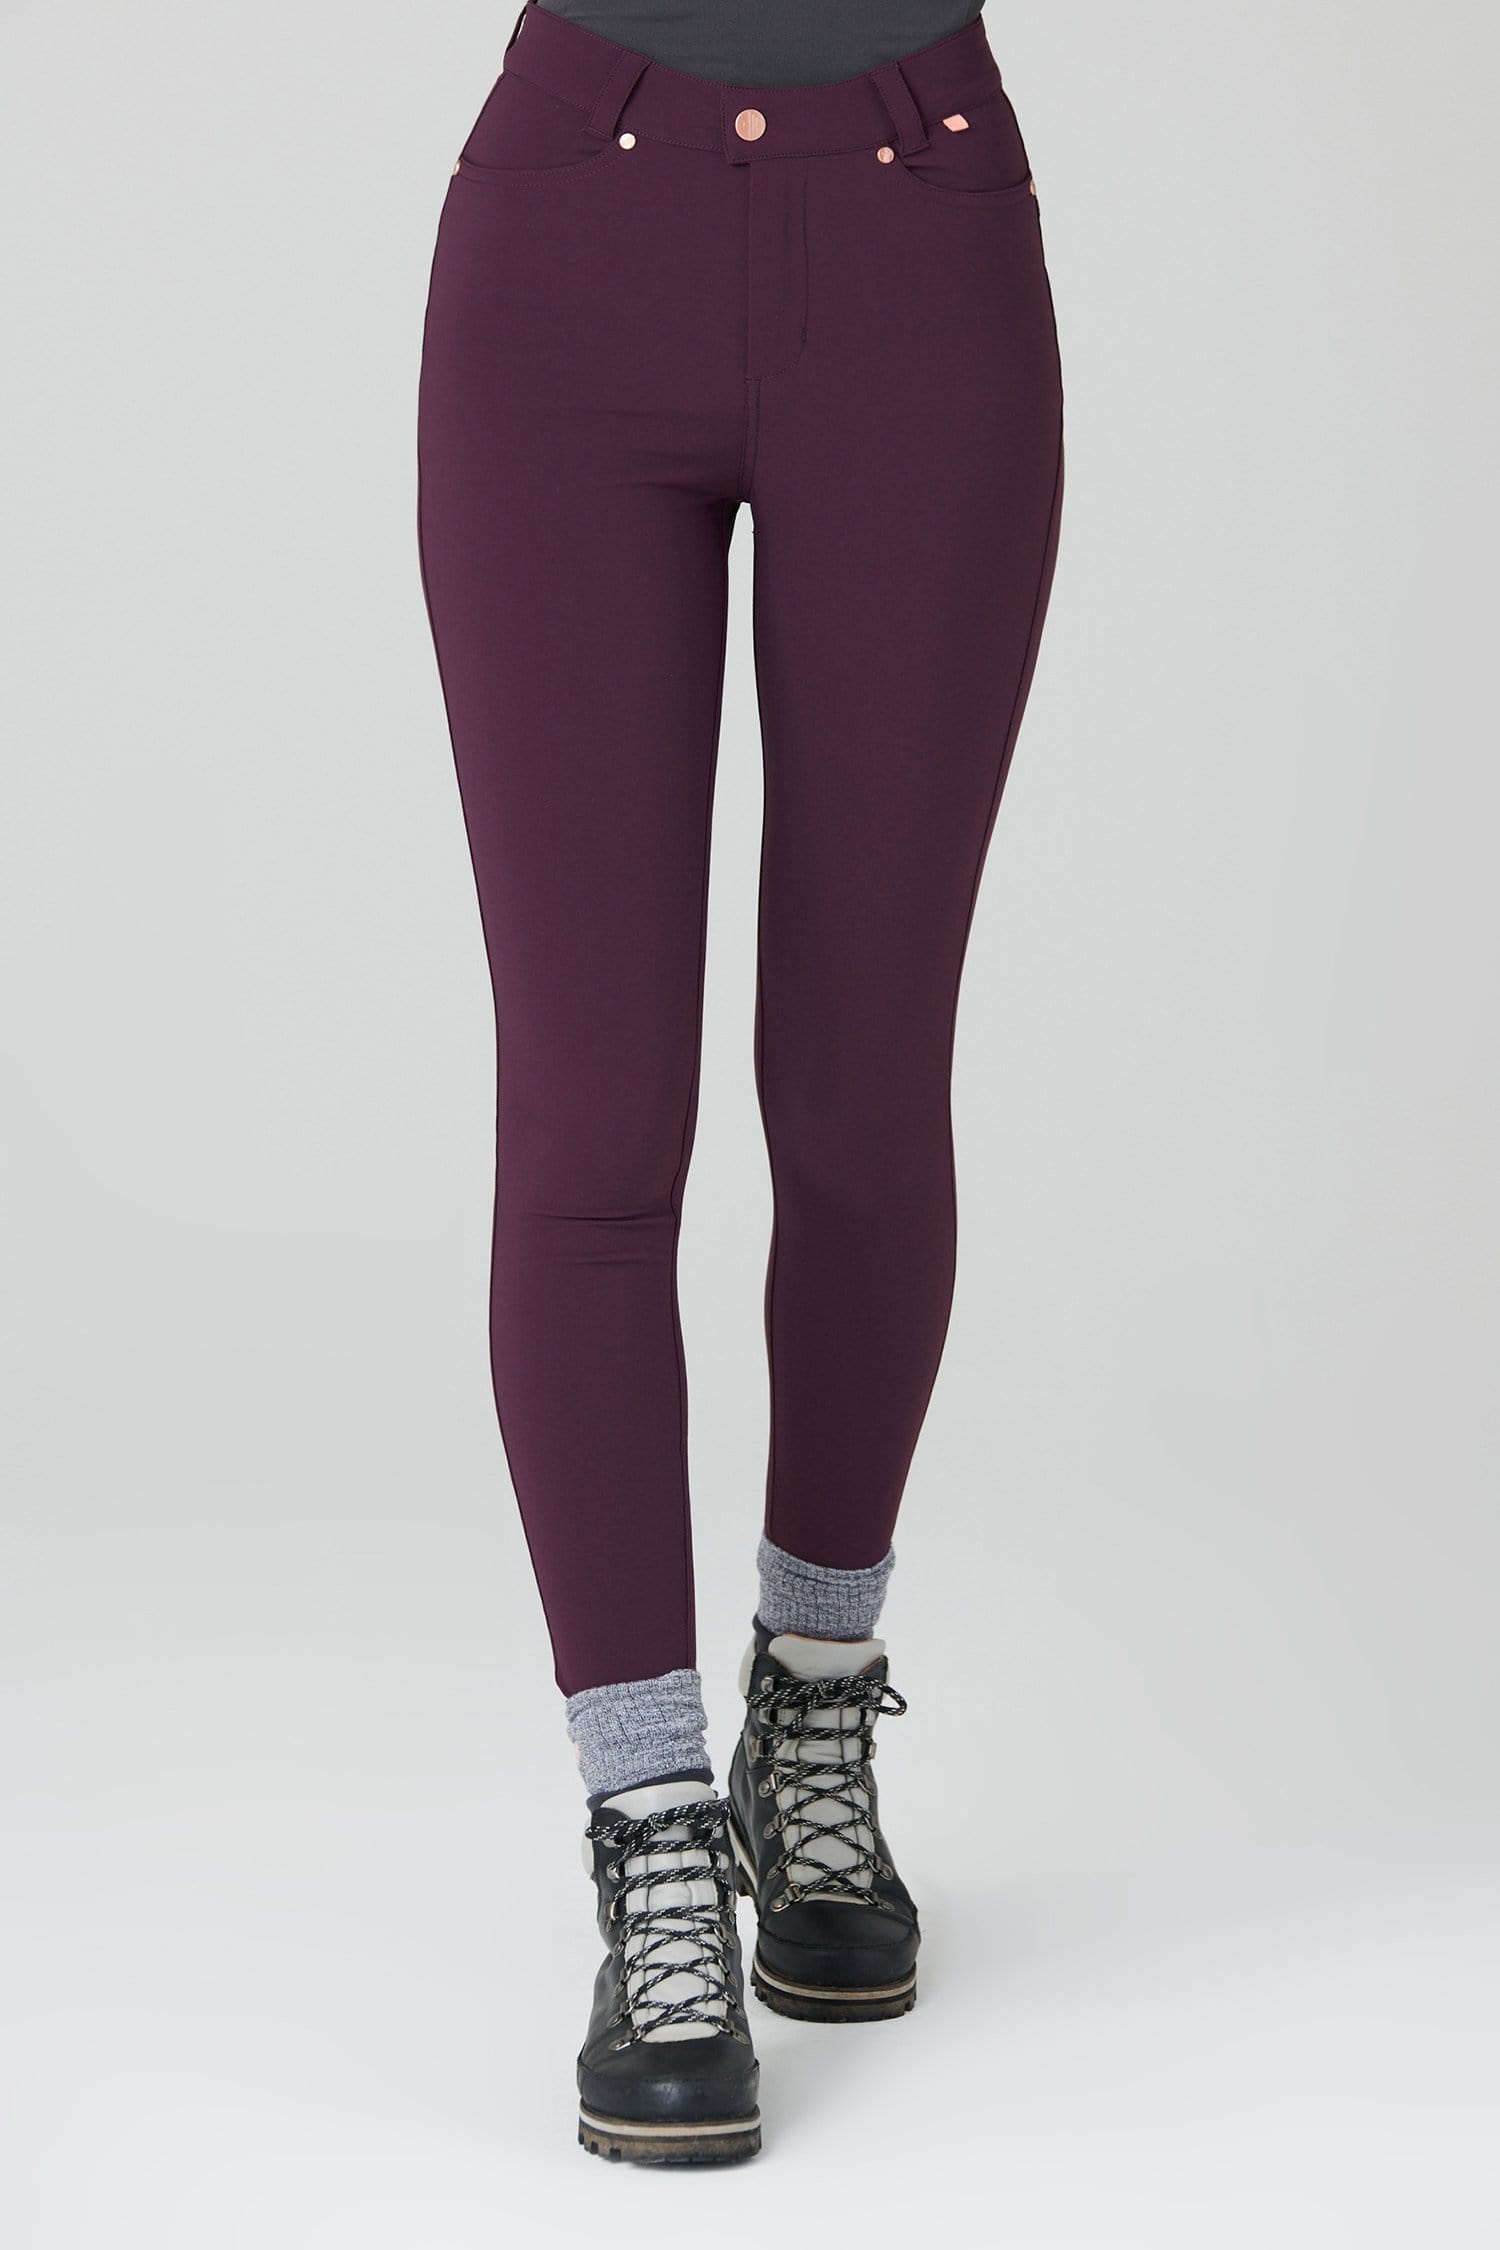 Max Stretch Skinny Outdoor Trousers - Aubergine - 26p / Uk8 - Womens - Acai Outdoorwear